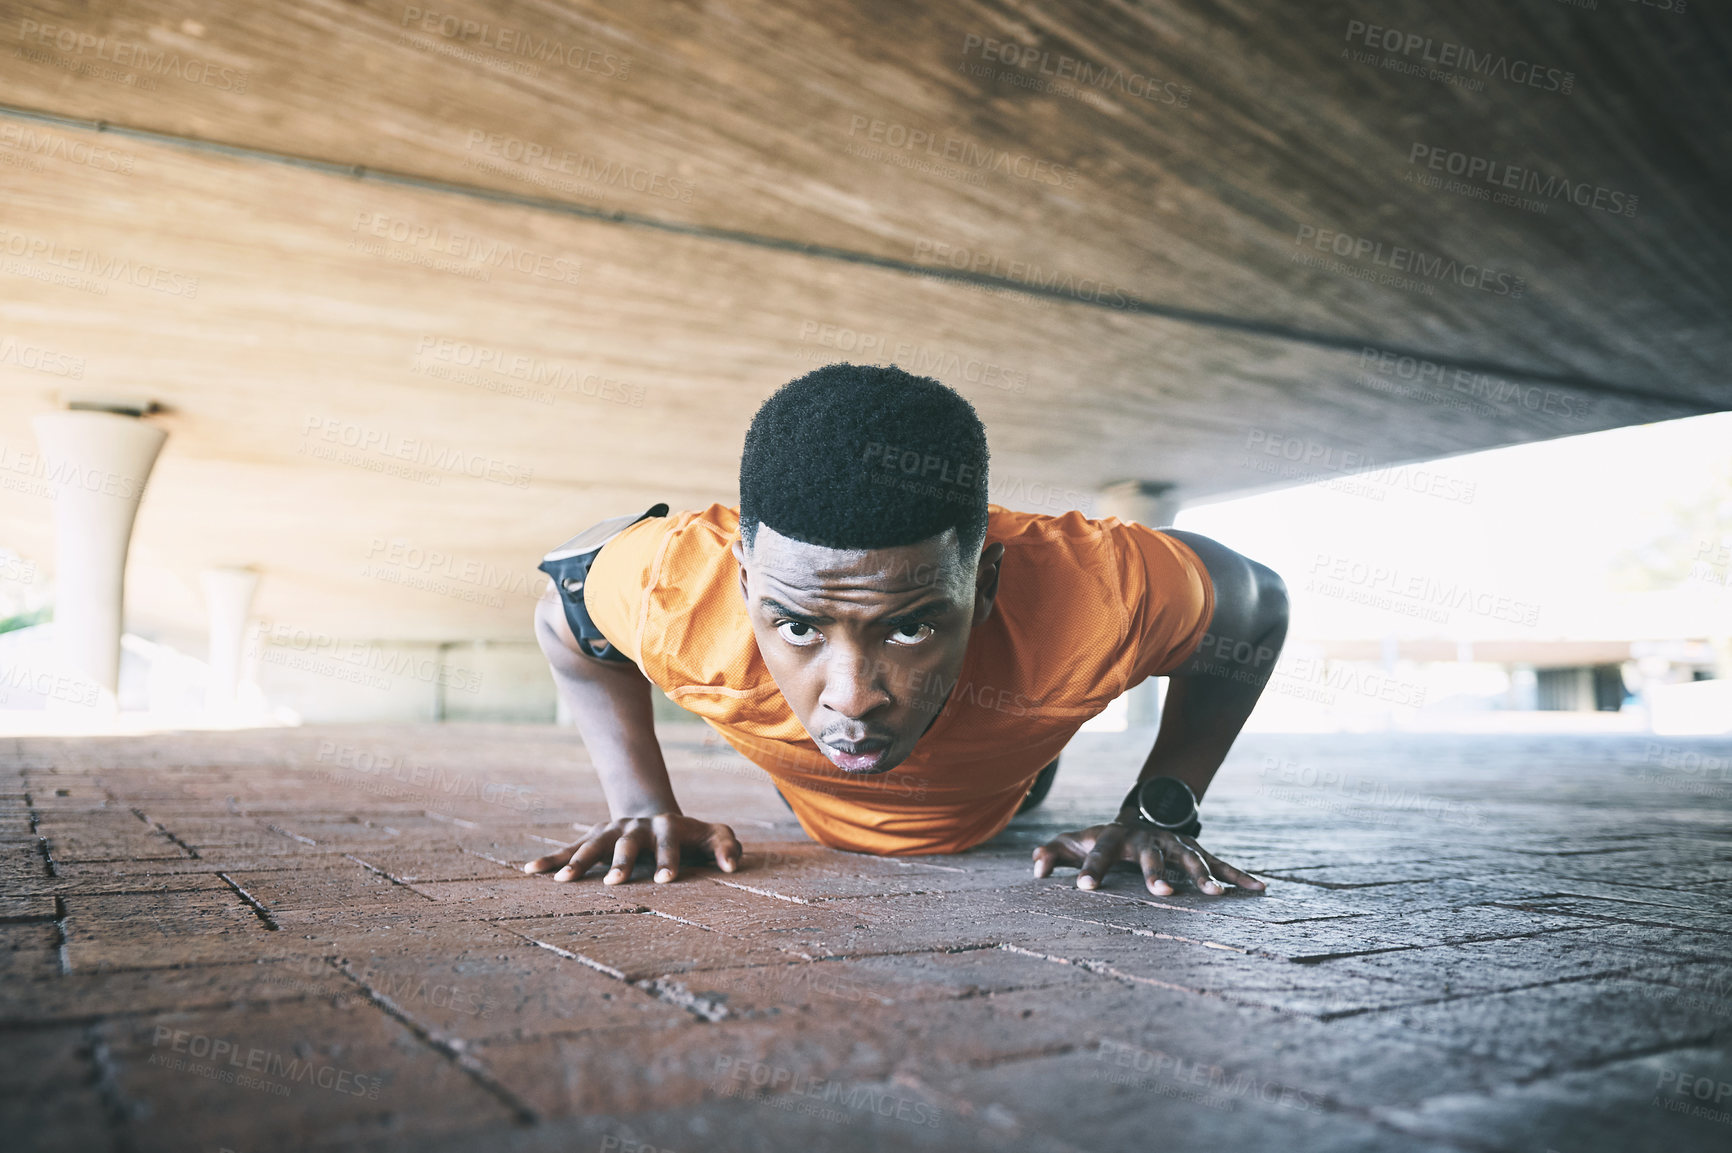 Buy stock photo Shot of a young man doing pushups against an urban background